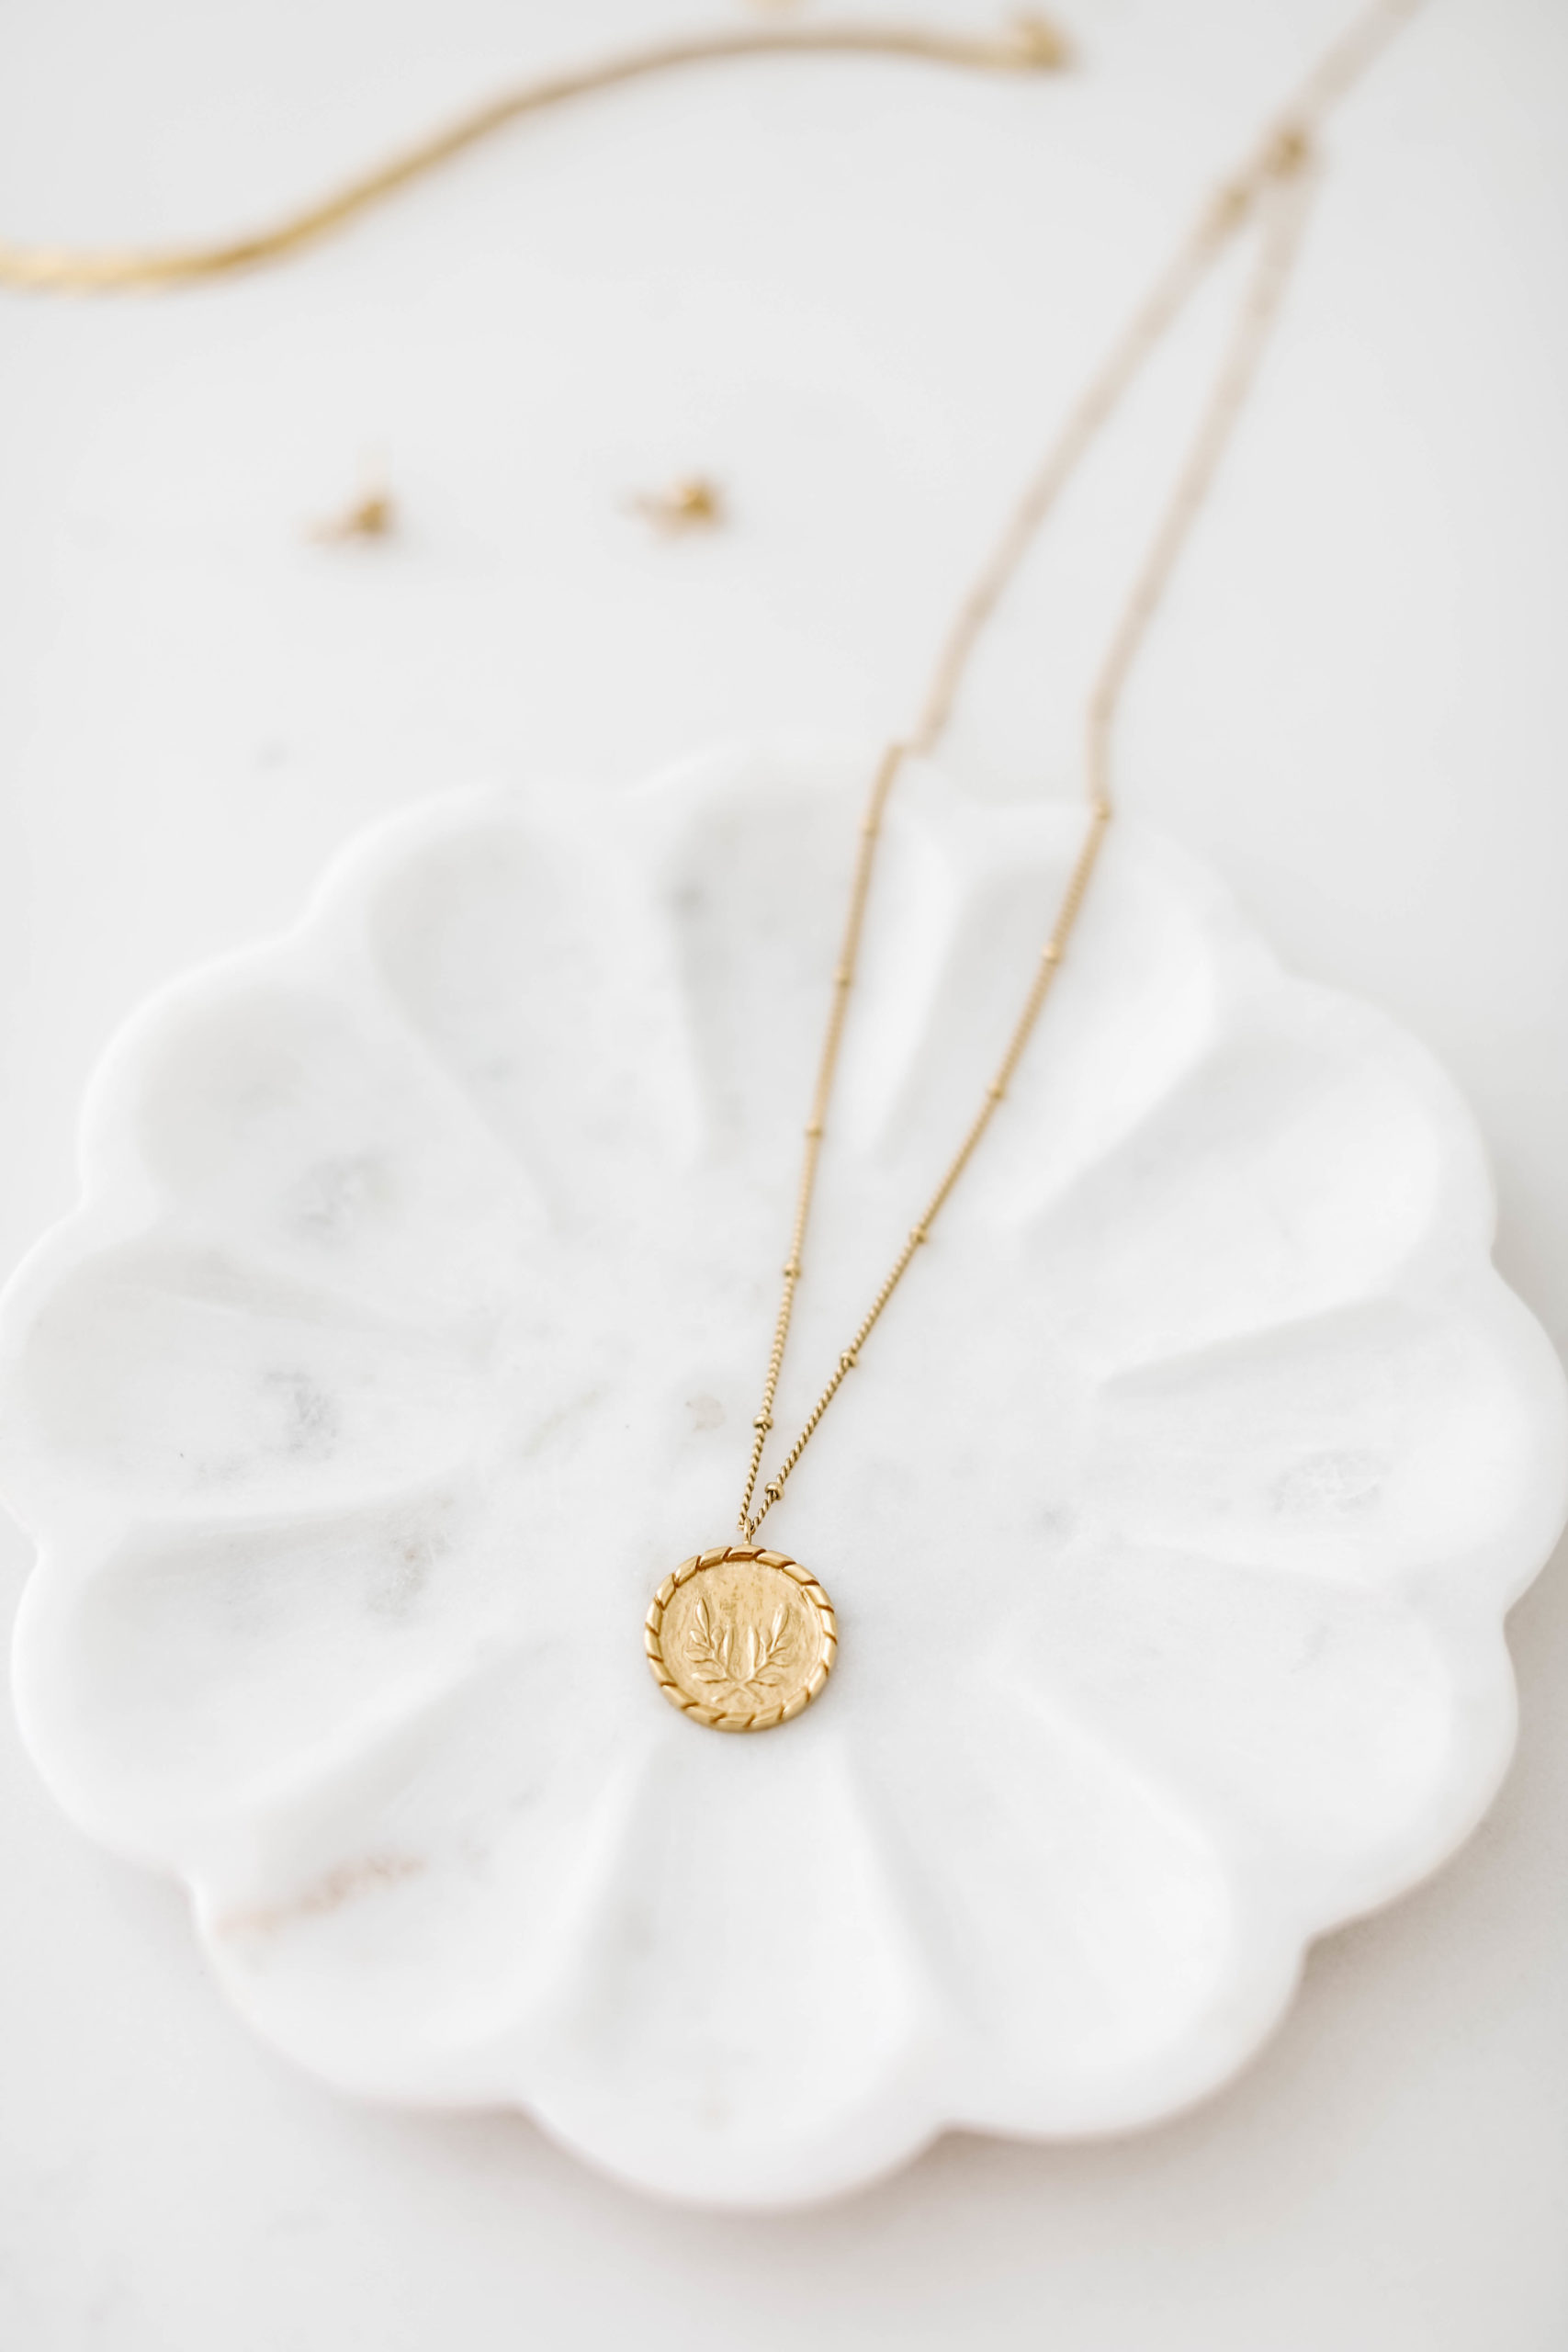 Token necklace in gold 5 Days of Mother's Day Giveaways : Day 1 So Pretty